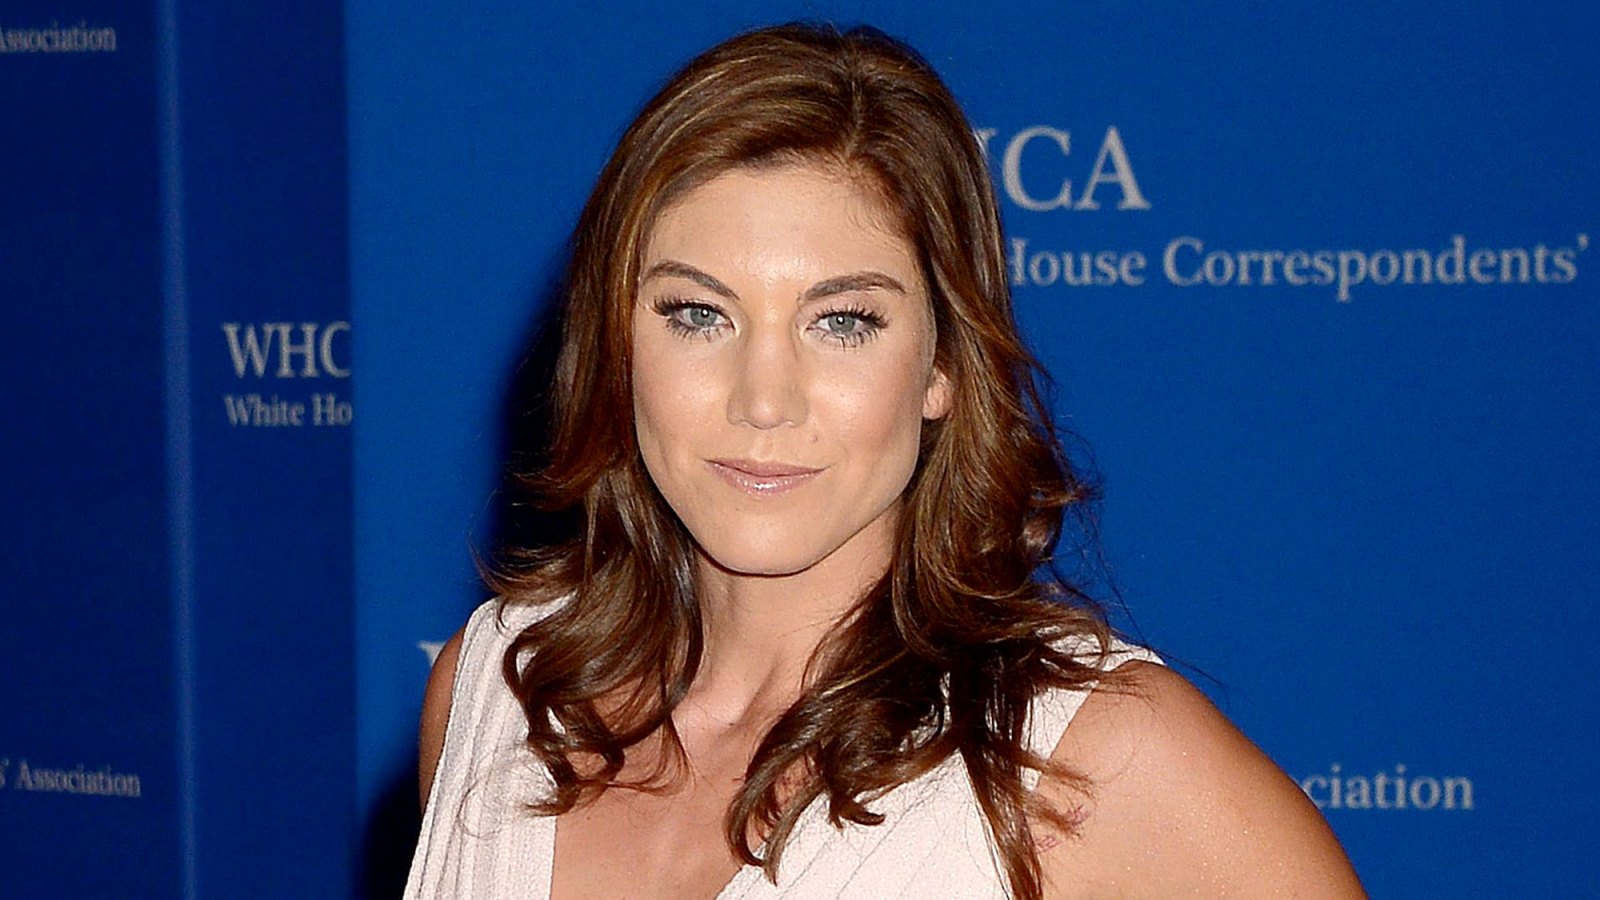 Hope Solo Says 'Her Kids Are Her Life' After DUI Arrest